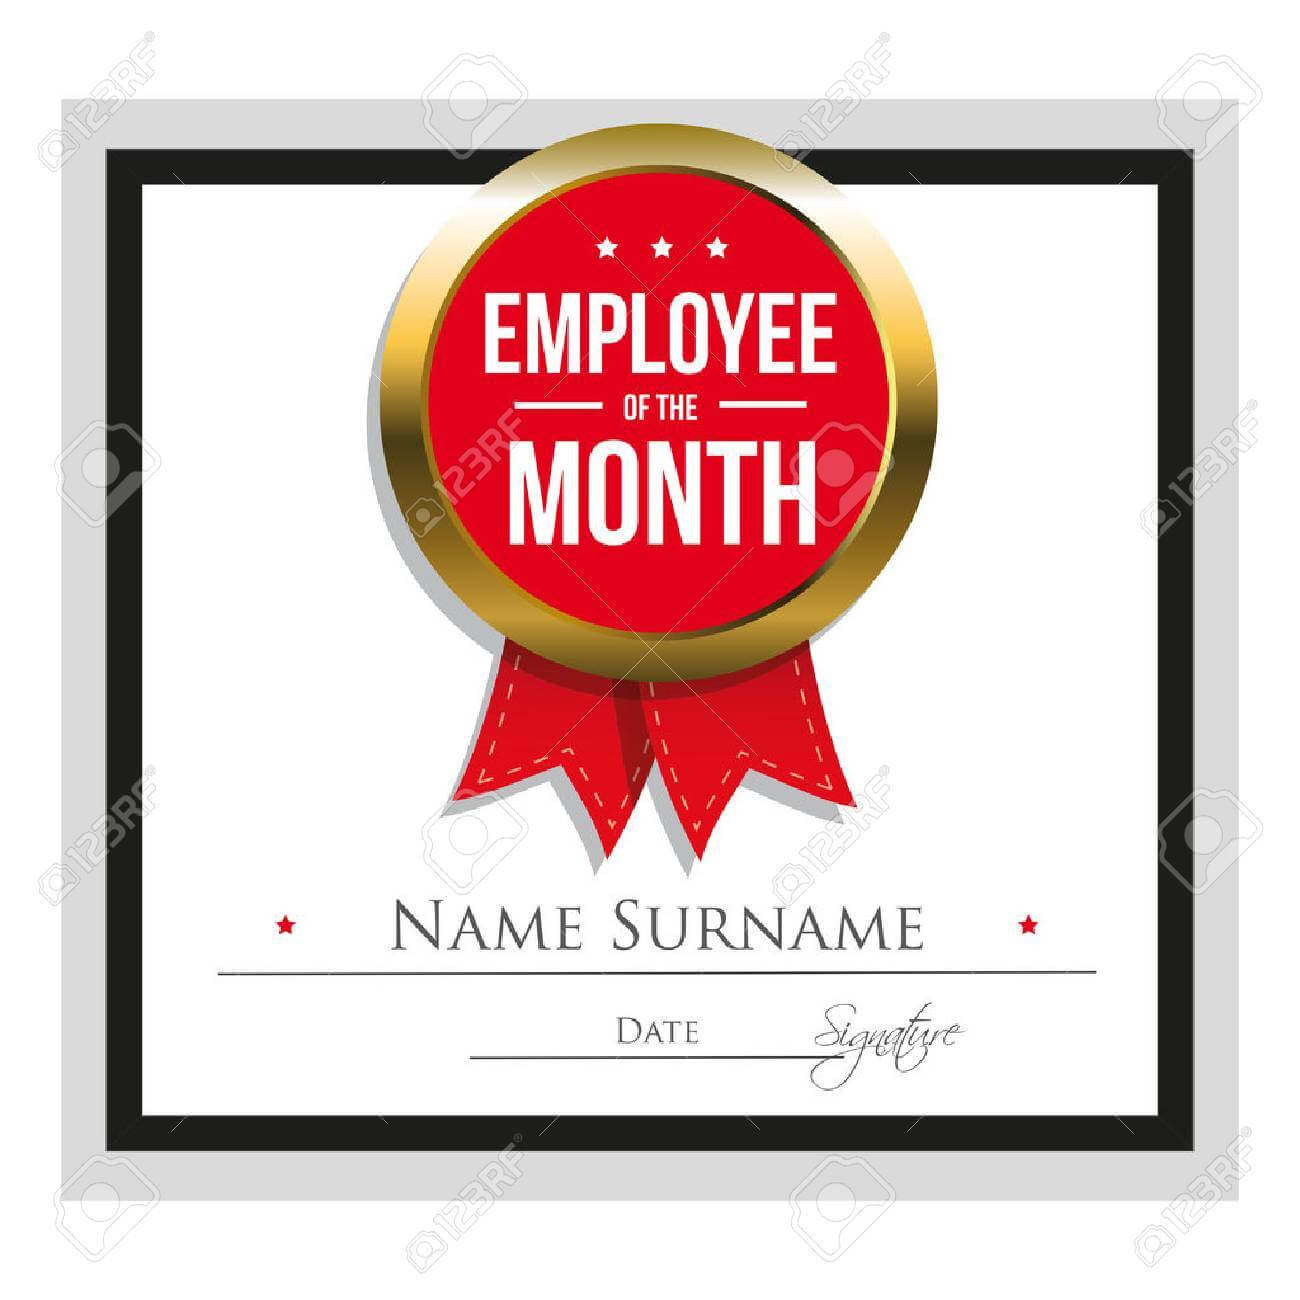 Employee Of The Month Certificate Template Inside Manager Of The Month Certificate Template